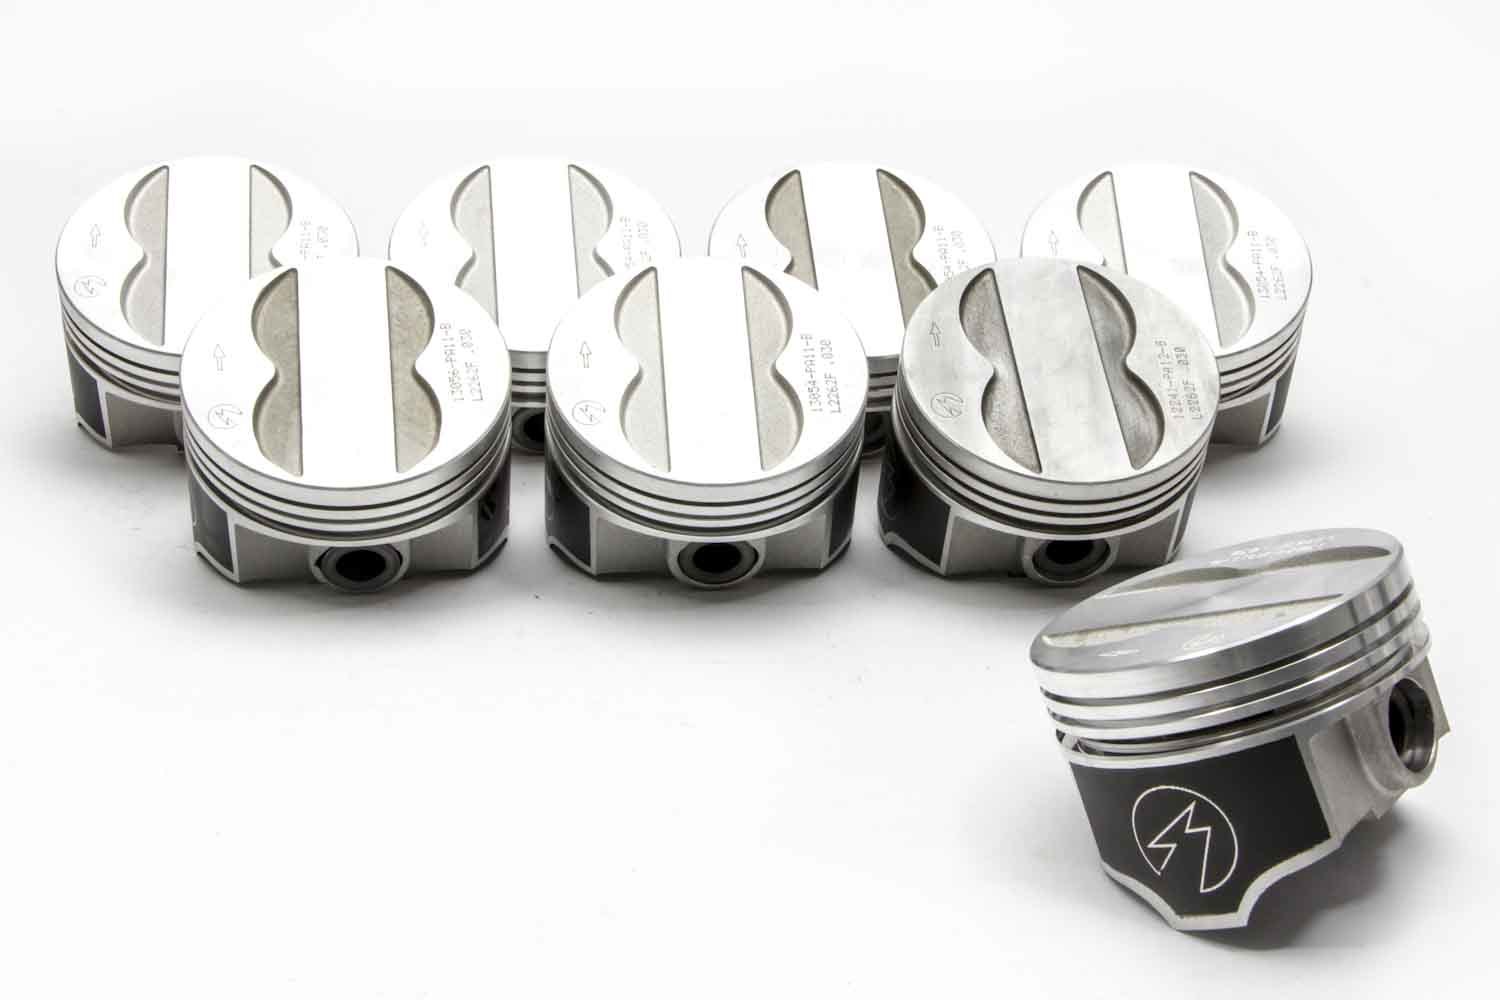 Sealed Power L2262F40 Piston, Speed Pro, Forged, 4.160 in Bore, 5/64 x 5/64 x 3/16 in Ring Grooves, Minus 6.70 cc, Coated Skirt, Pontiac V8, Set of 8